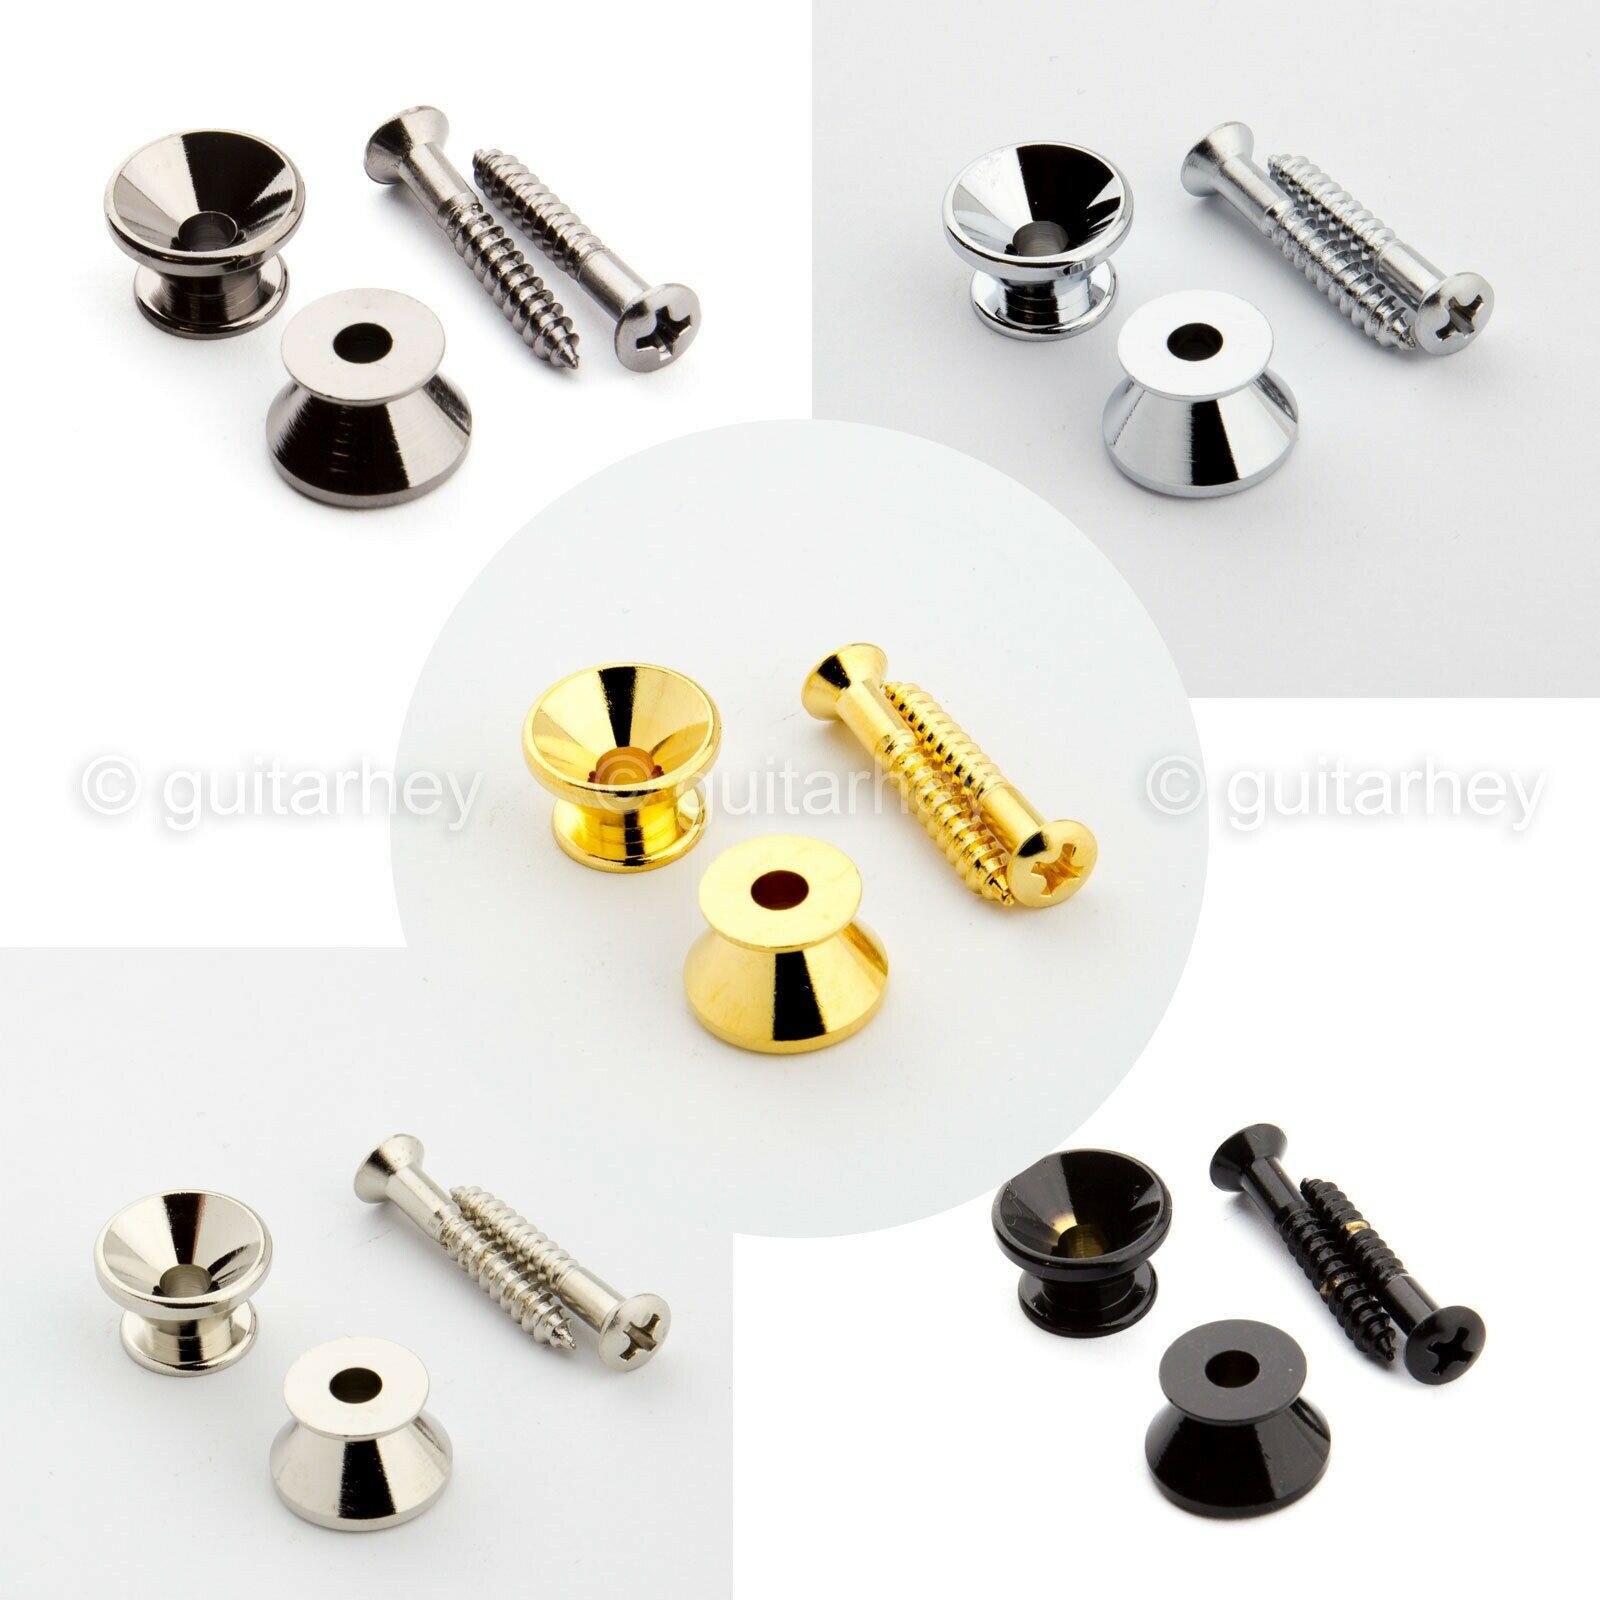 New Gotoh Ep-b2 Strap Buttons For Fender® Guitar/bass - Various Finishes